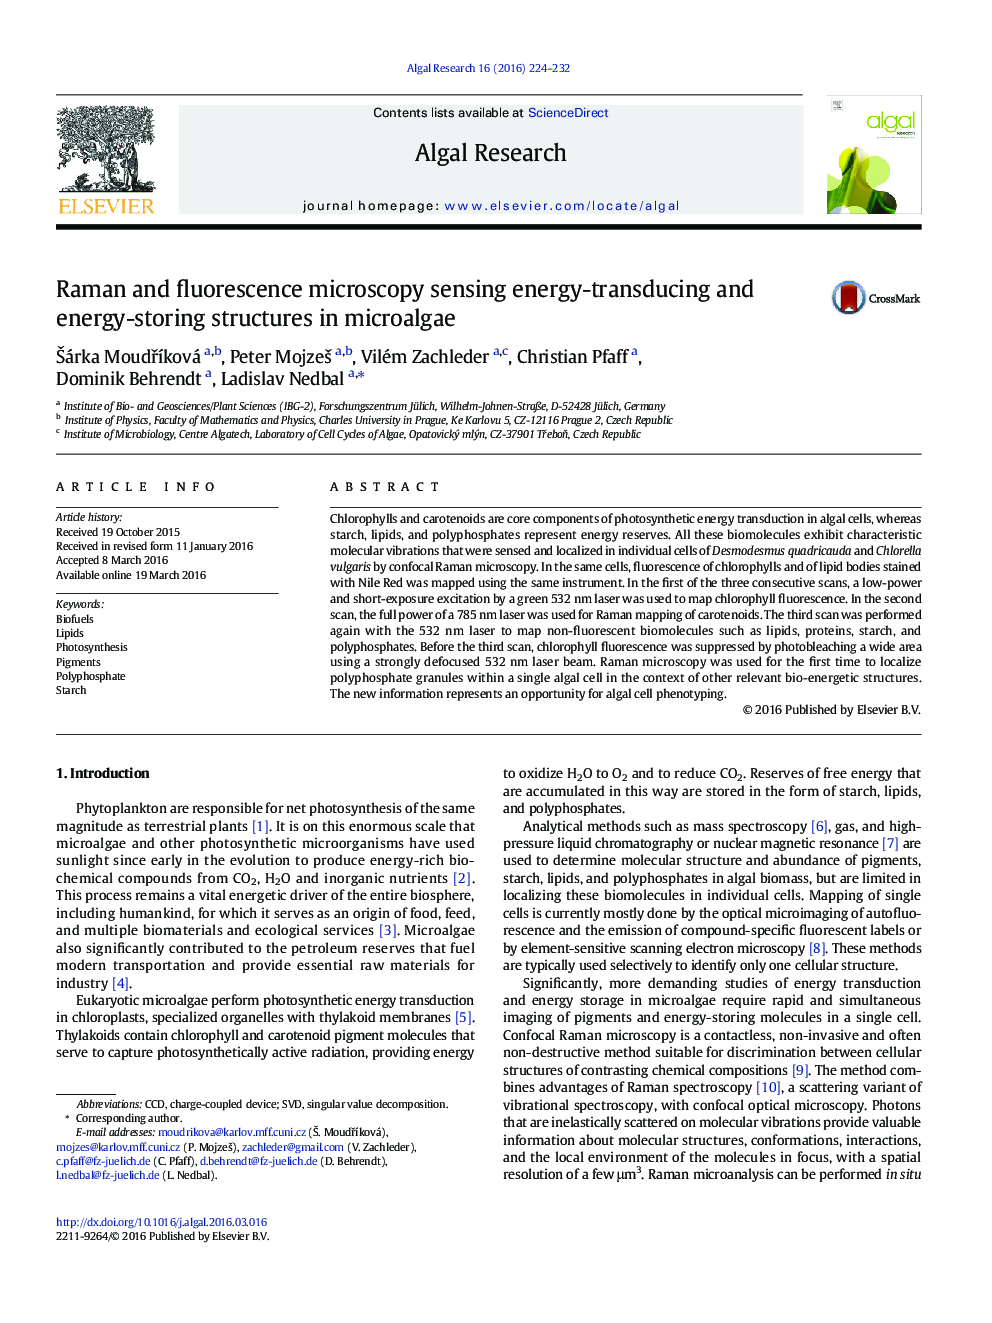 Raman and fluorescence microscopy sensing energy-transducing and energy-storing structures in microalgae